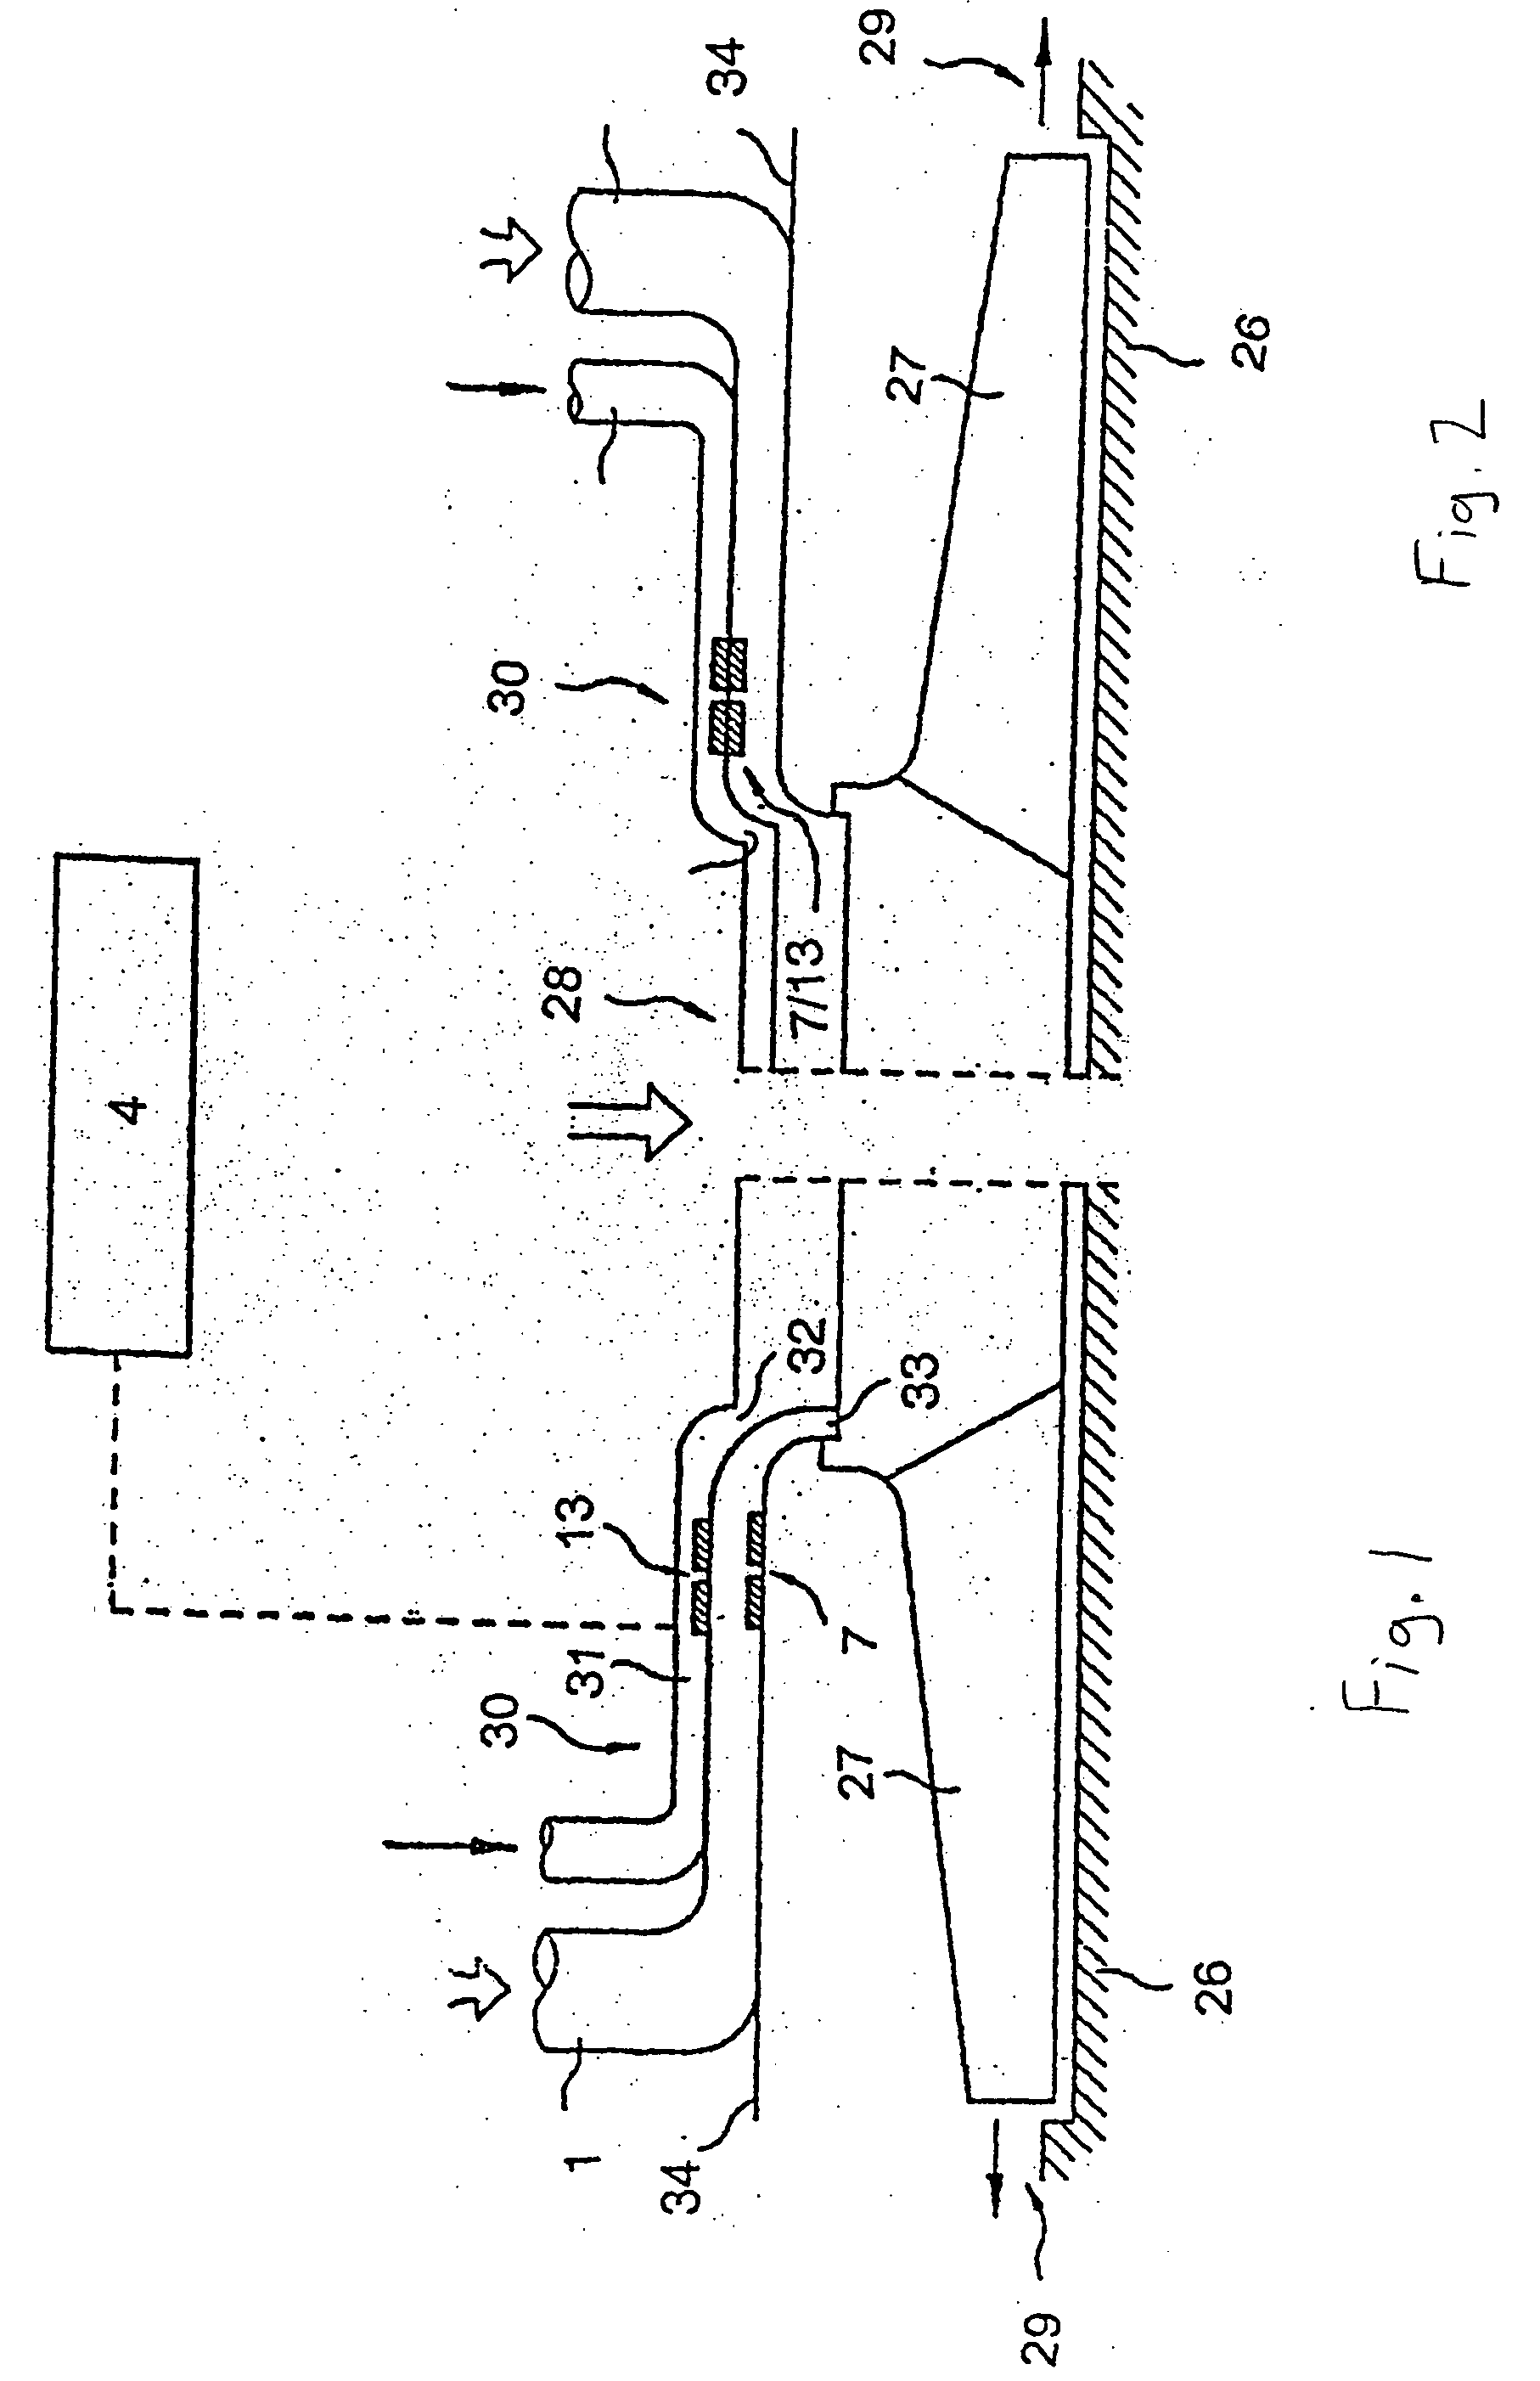 Blower for combustion air